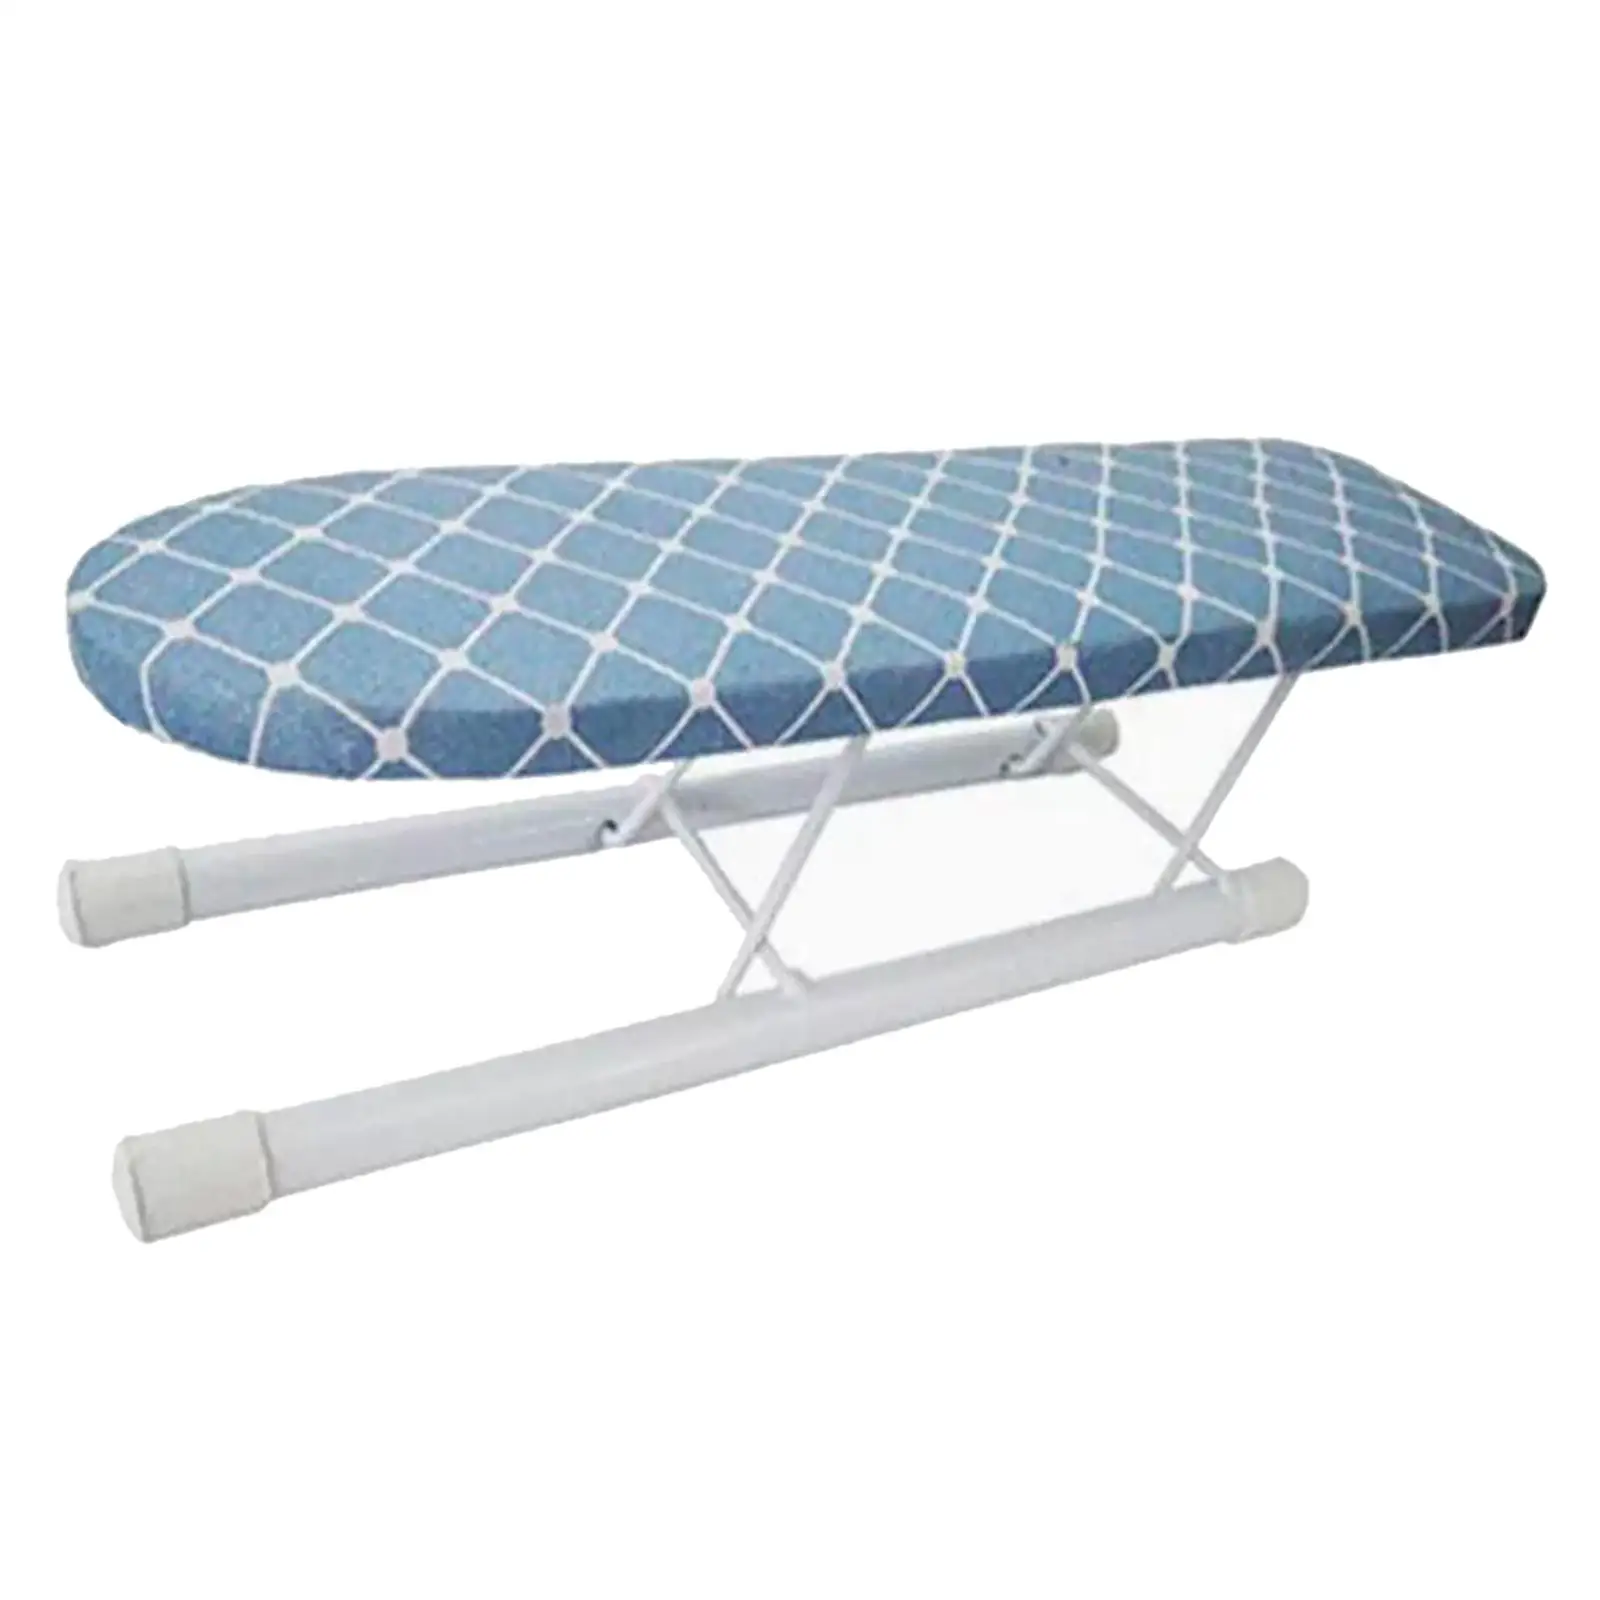 Mini Ironing Board Ironing Cuffs Neckline Sleeve Ironing Table for Household